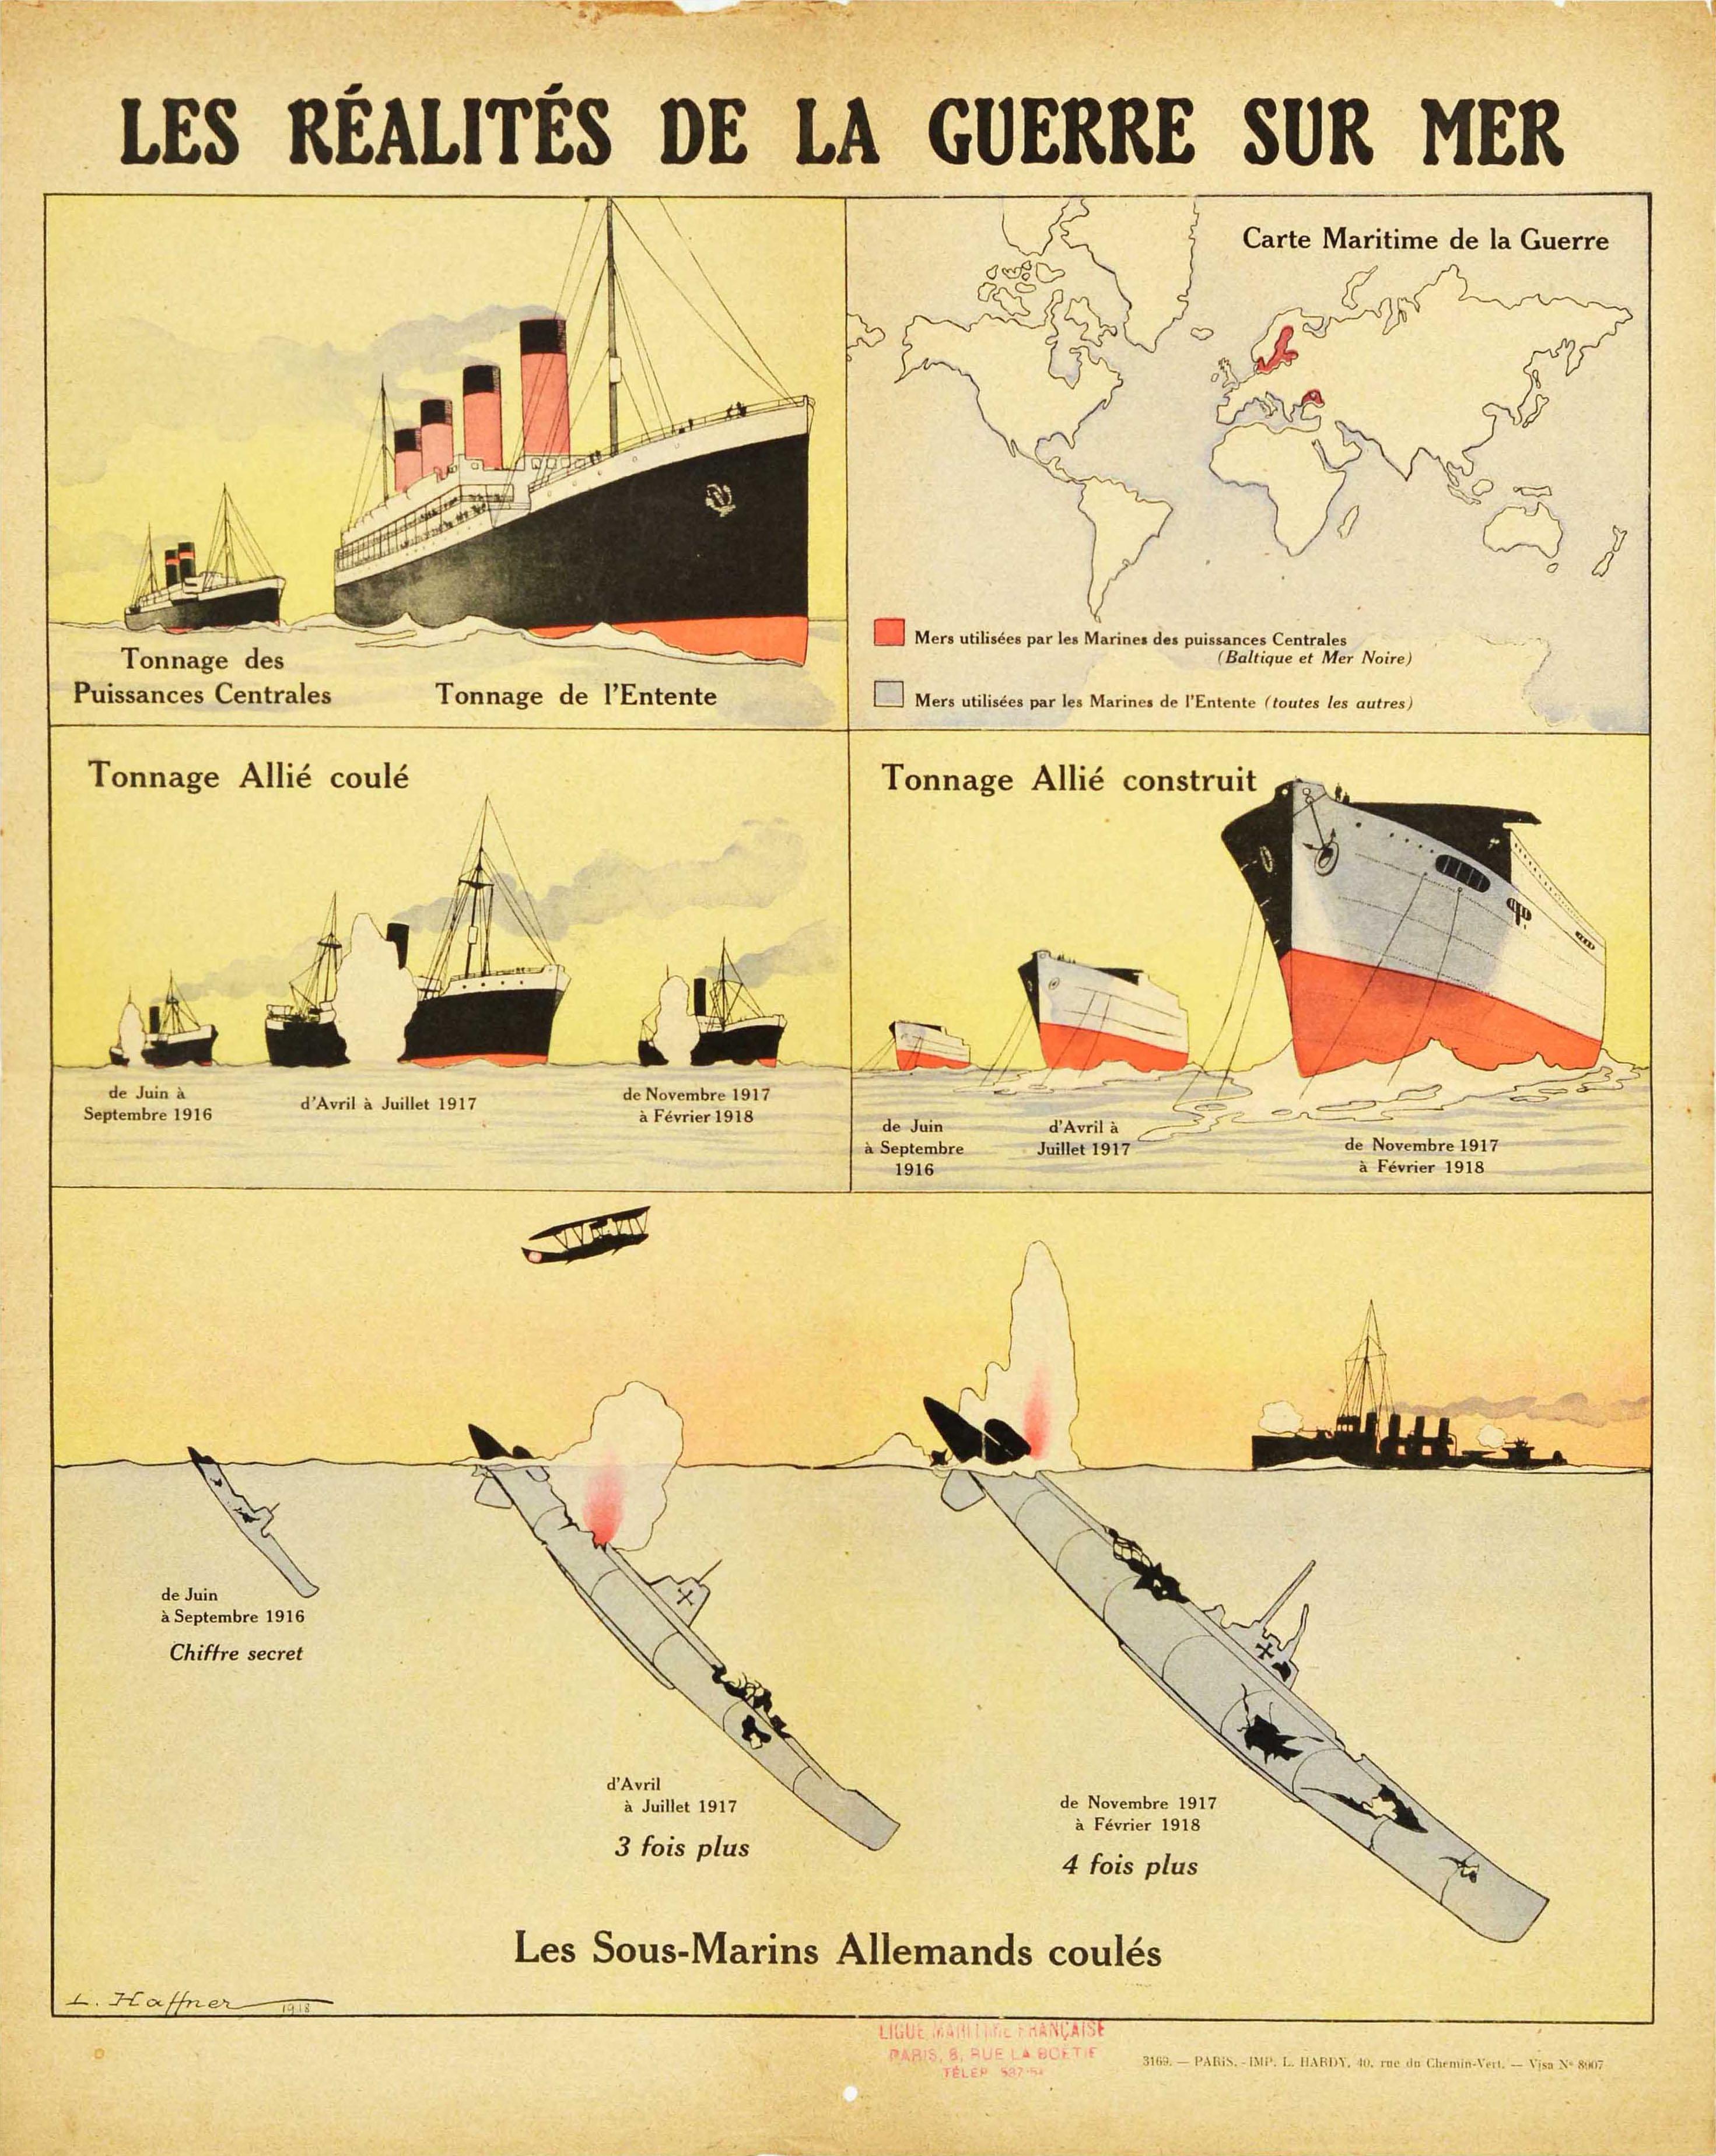 Leon Haffner Print - Original Antique WWI Poster Reality Of War At Sea Ship Submarine Guerre Sur Mer